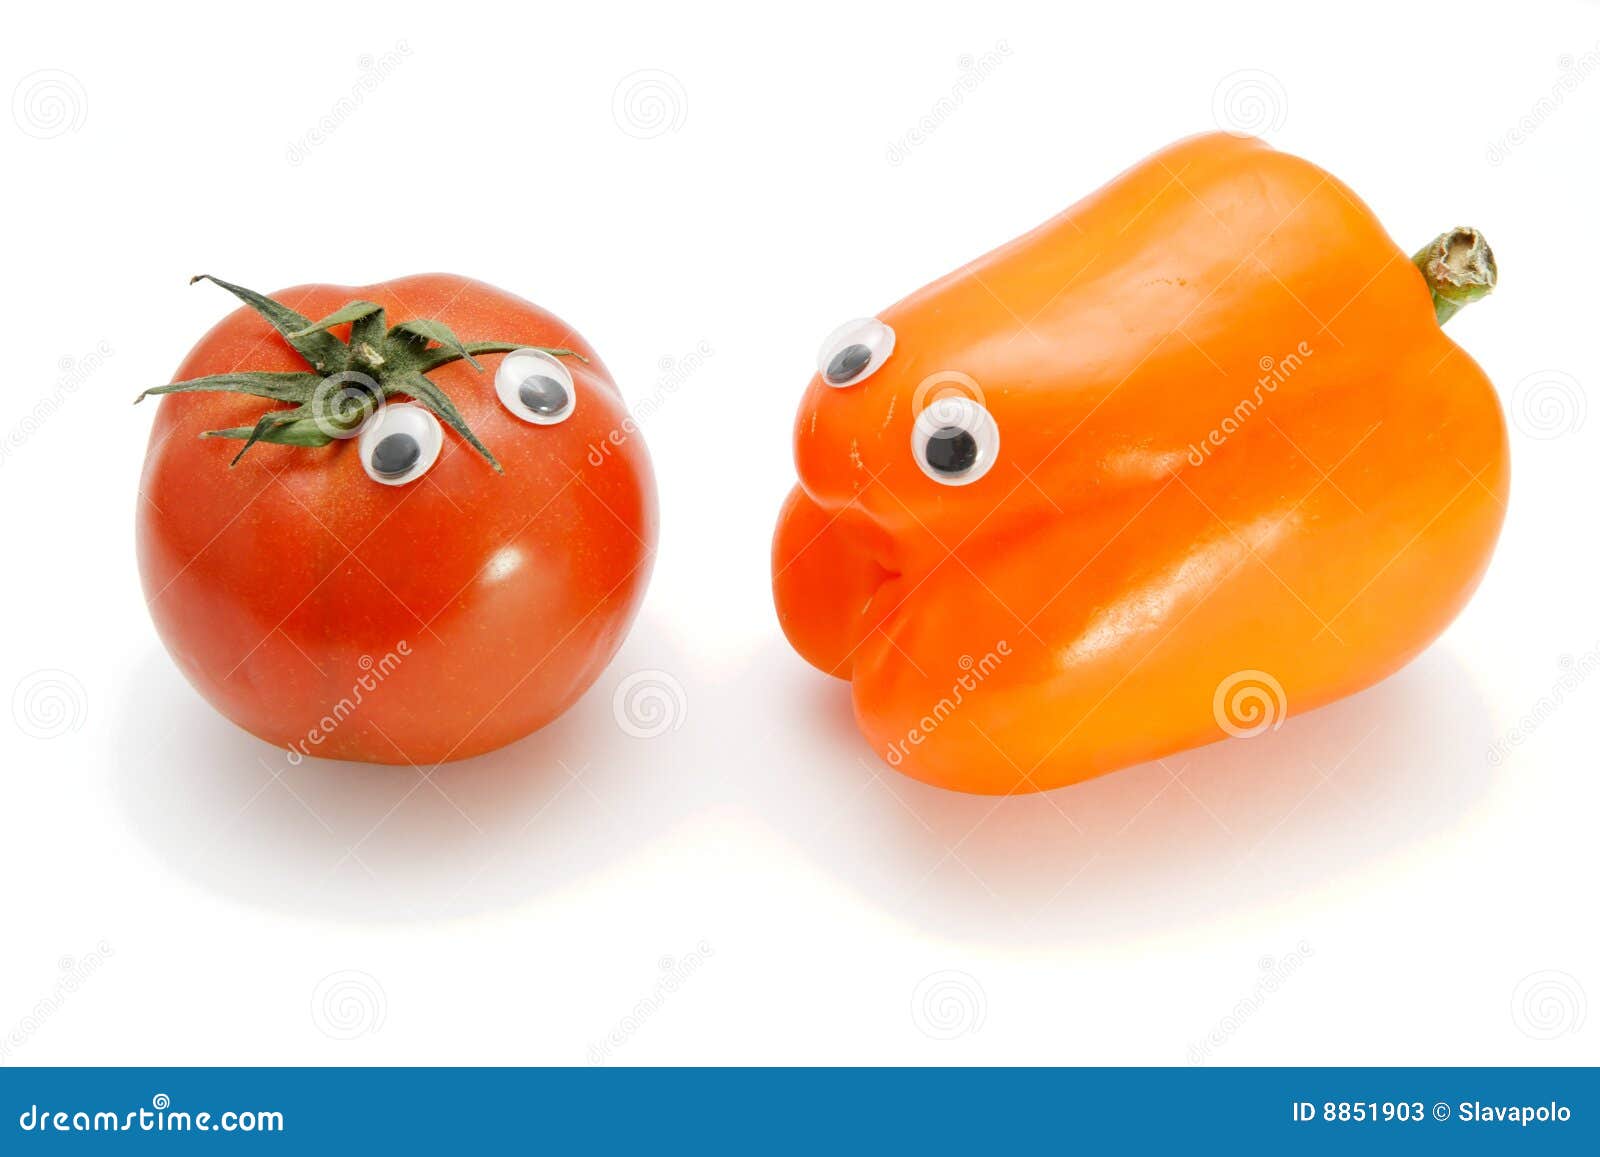 tomato and bellpepper with eyes